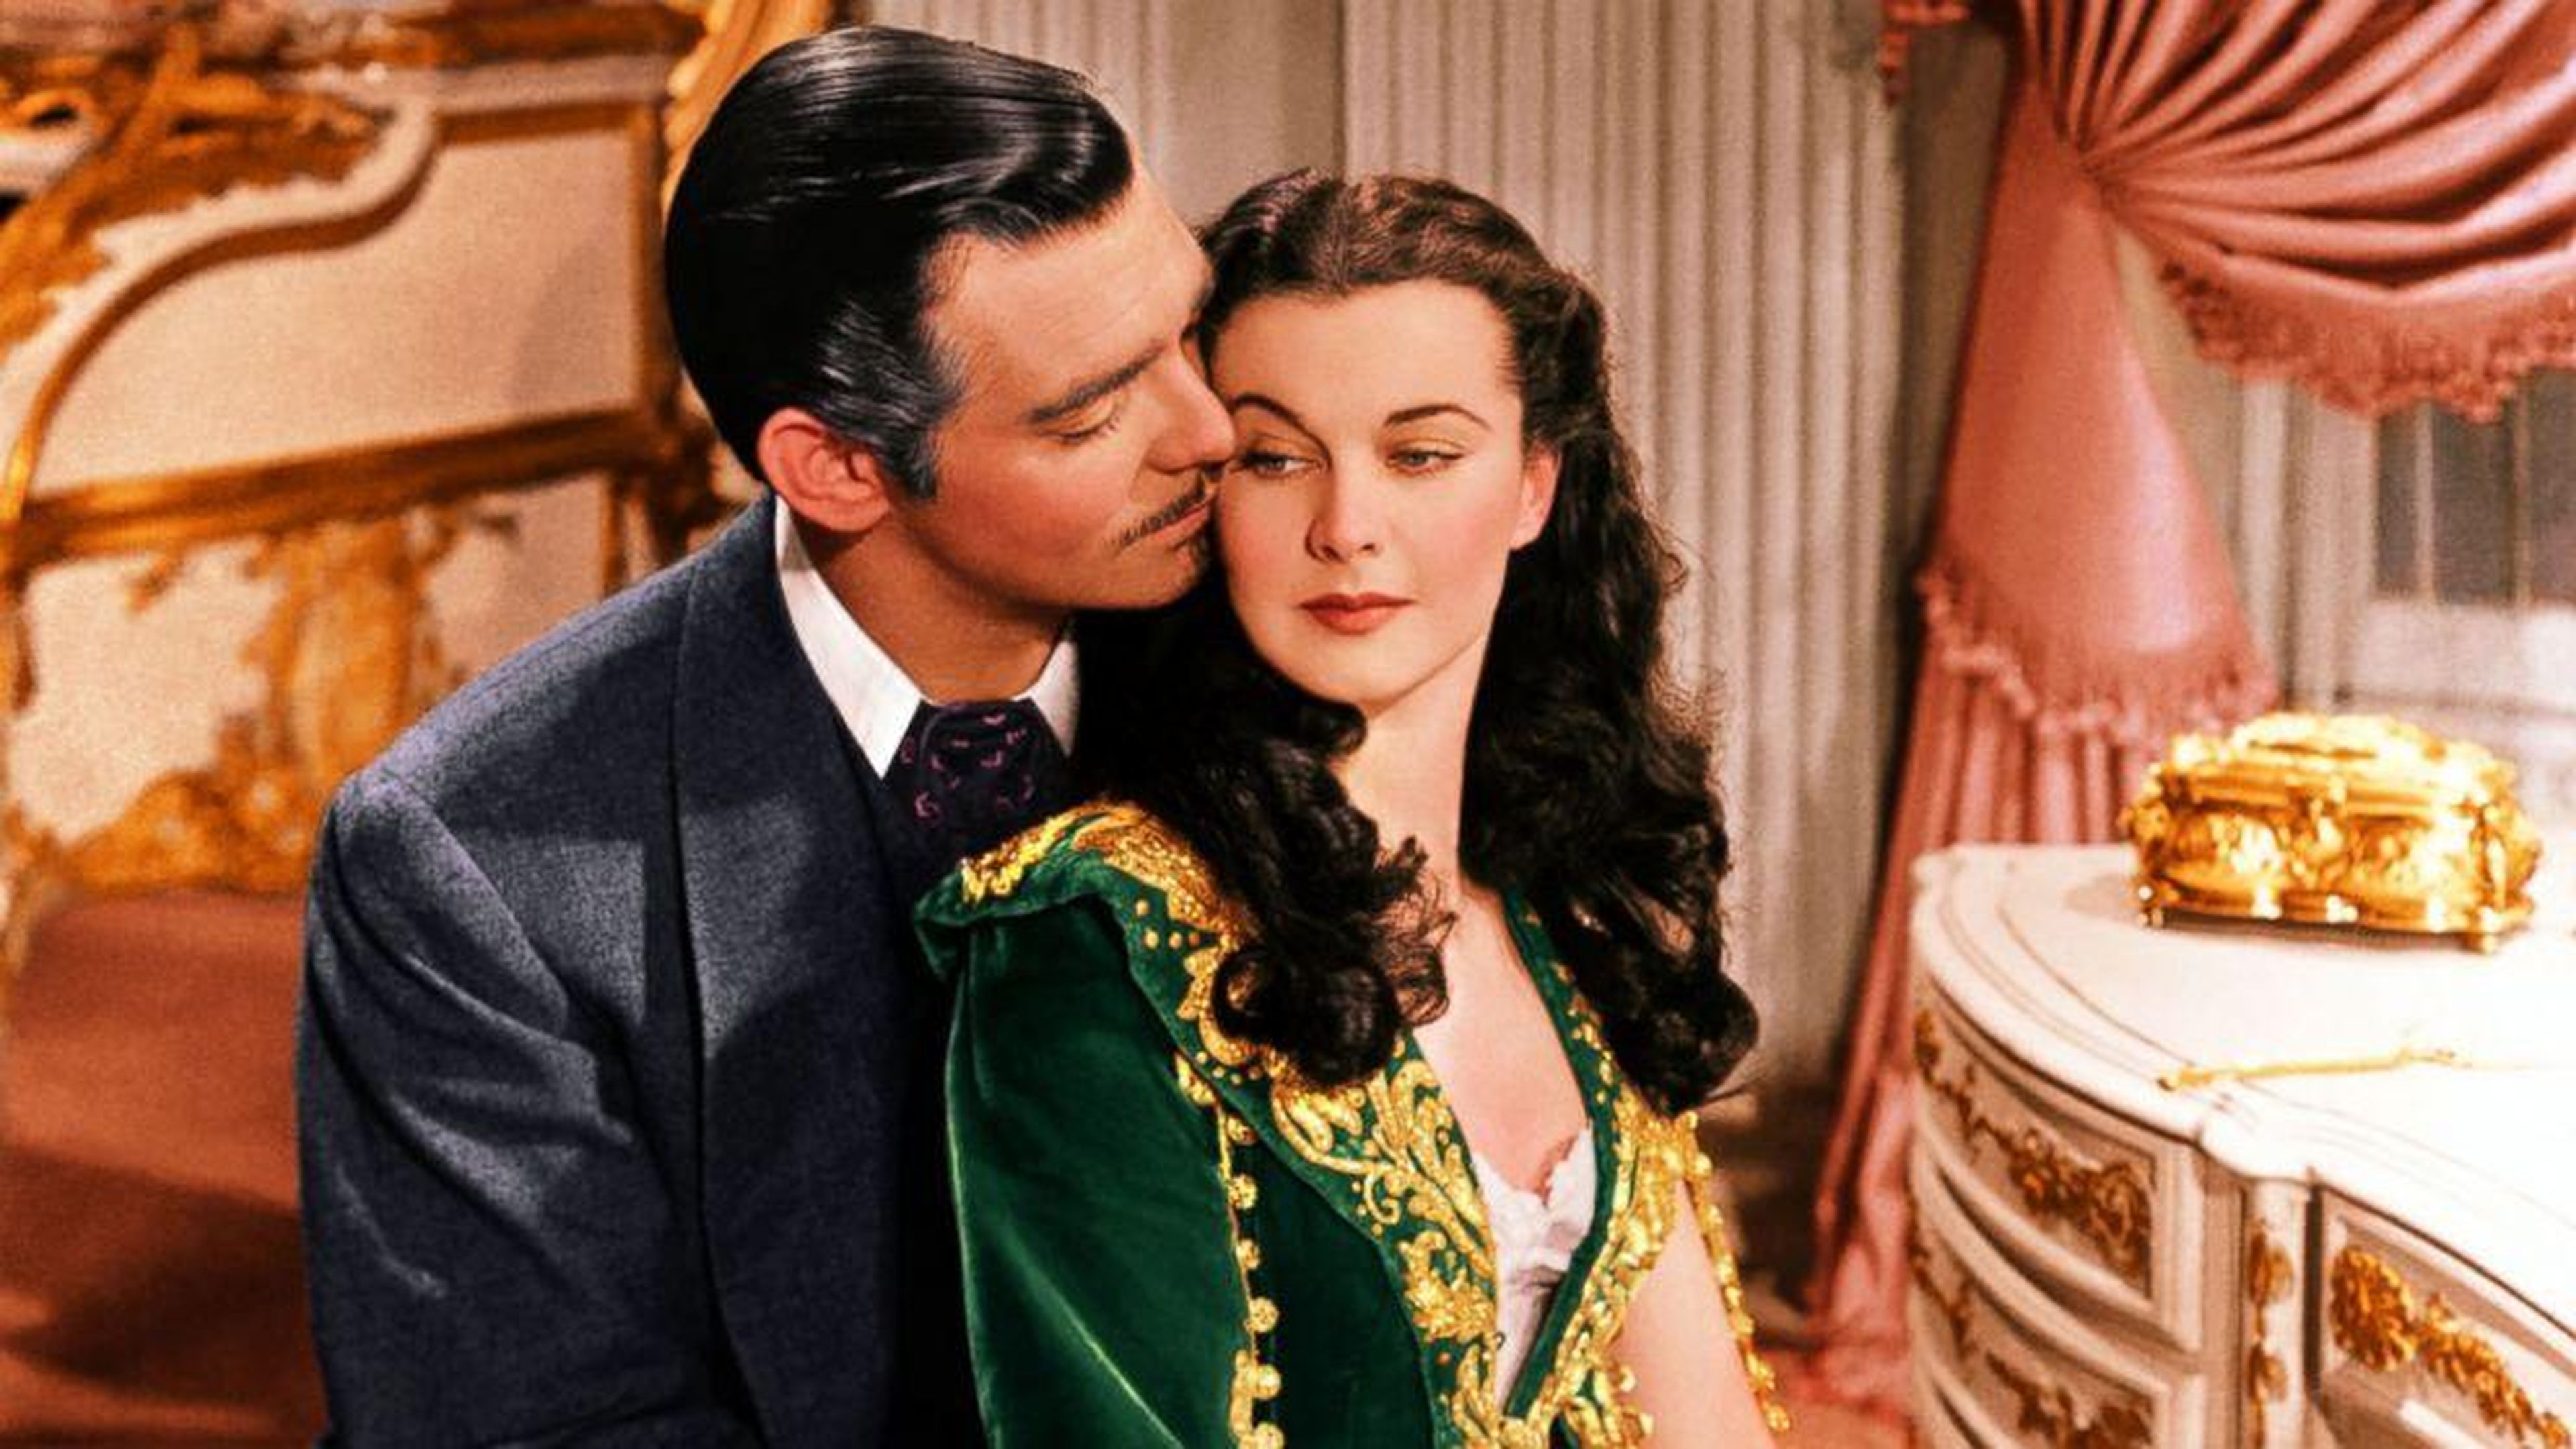 15. "Gone With The Wind" (1940)